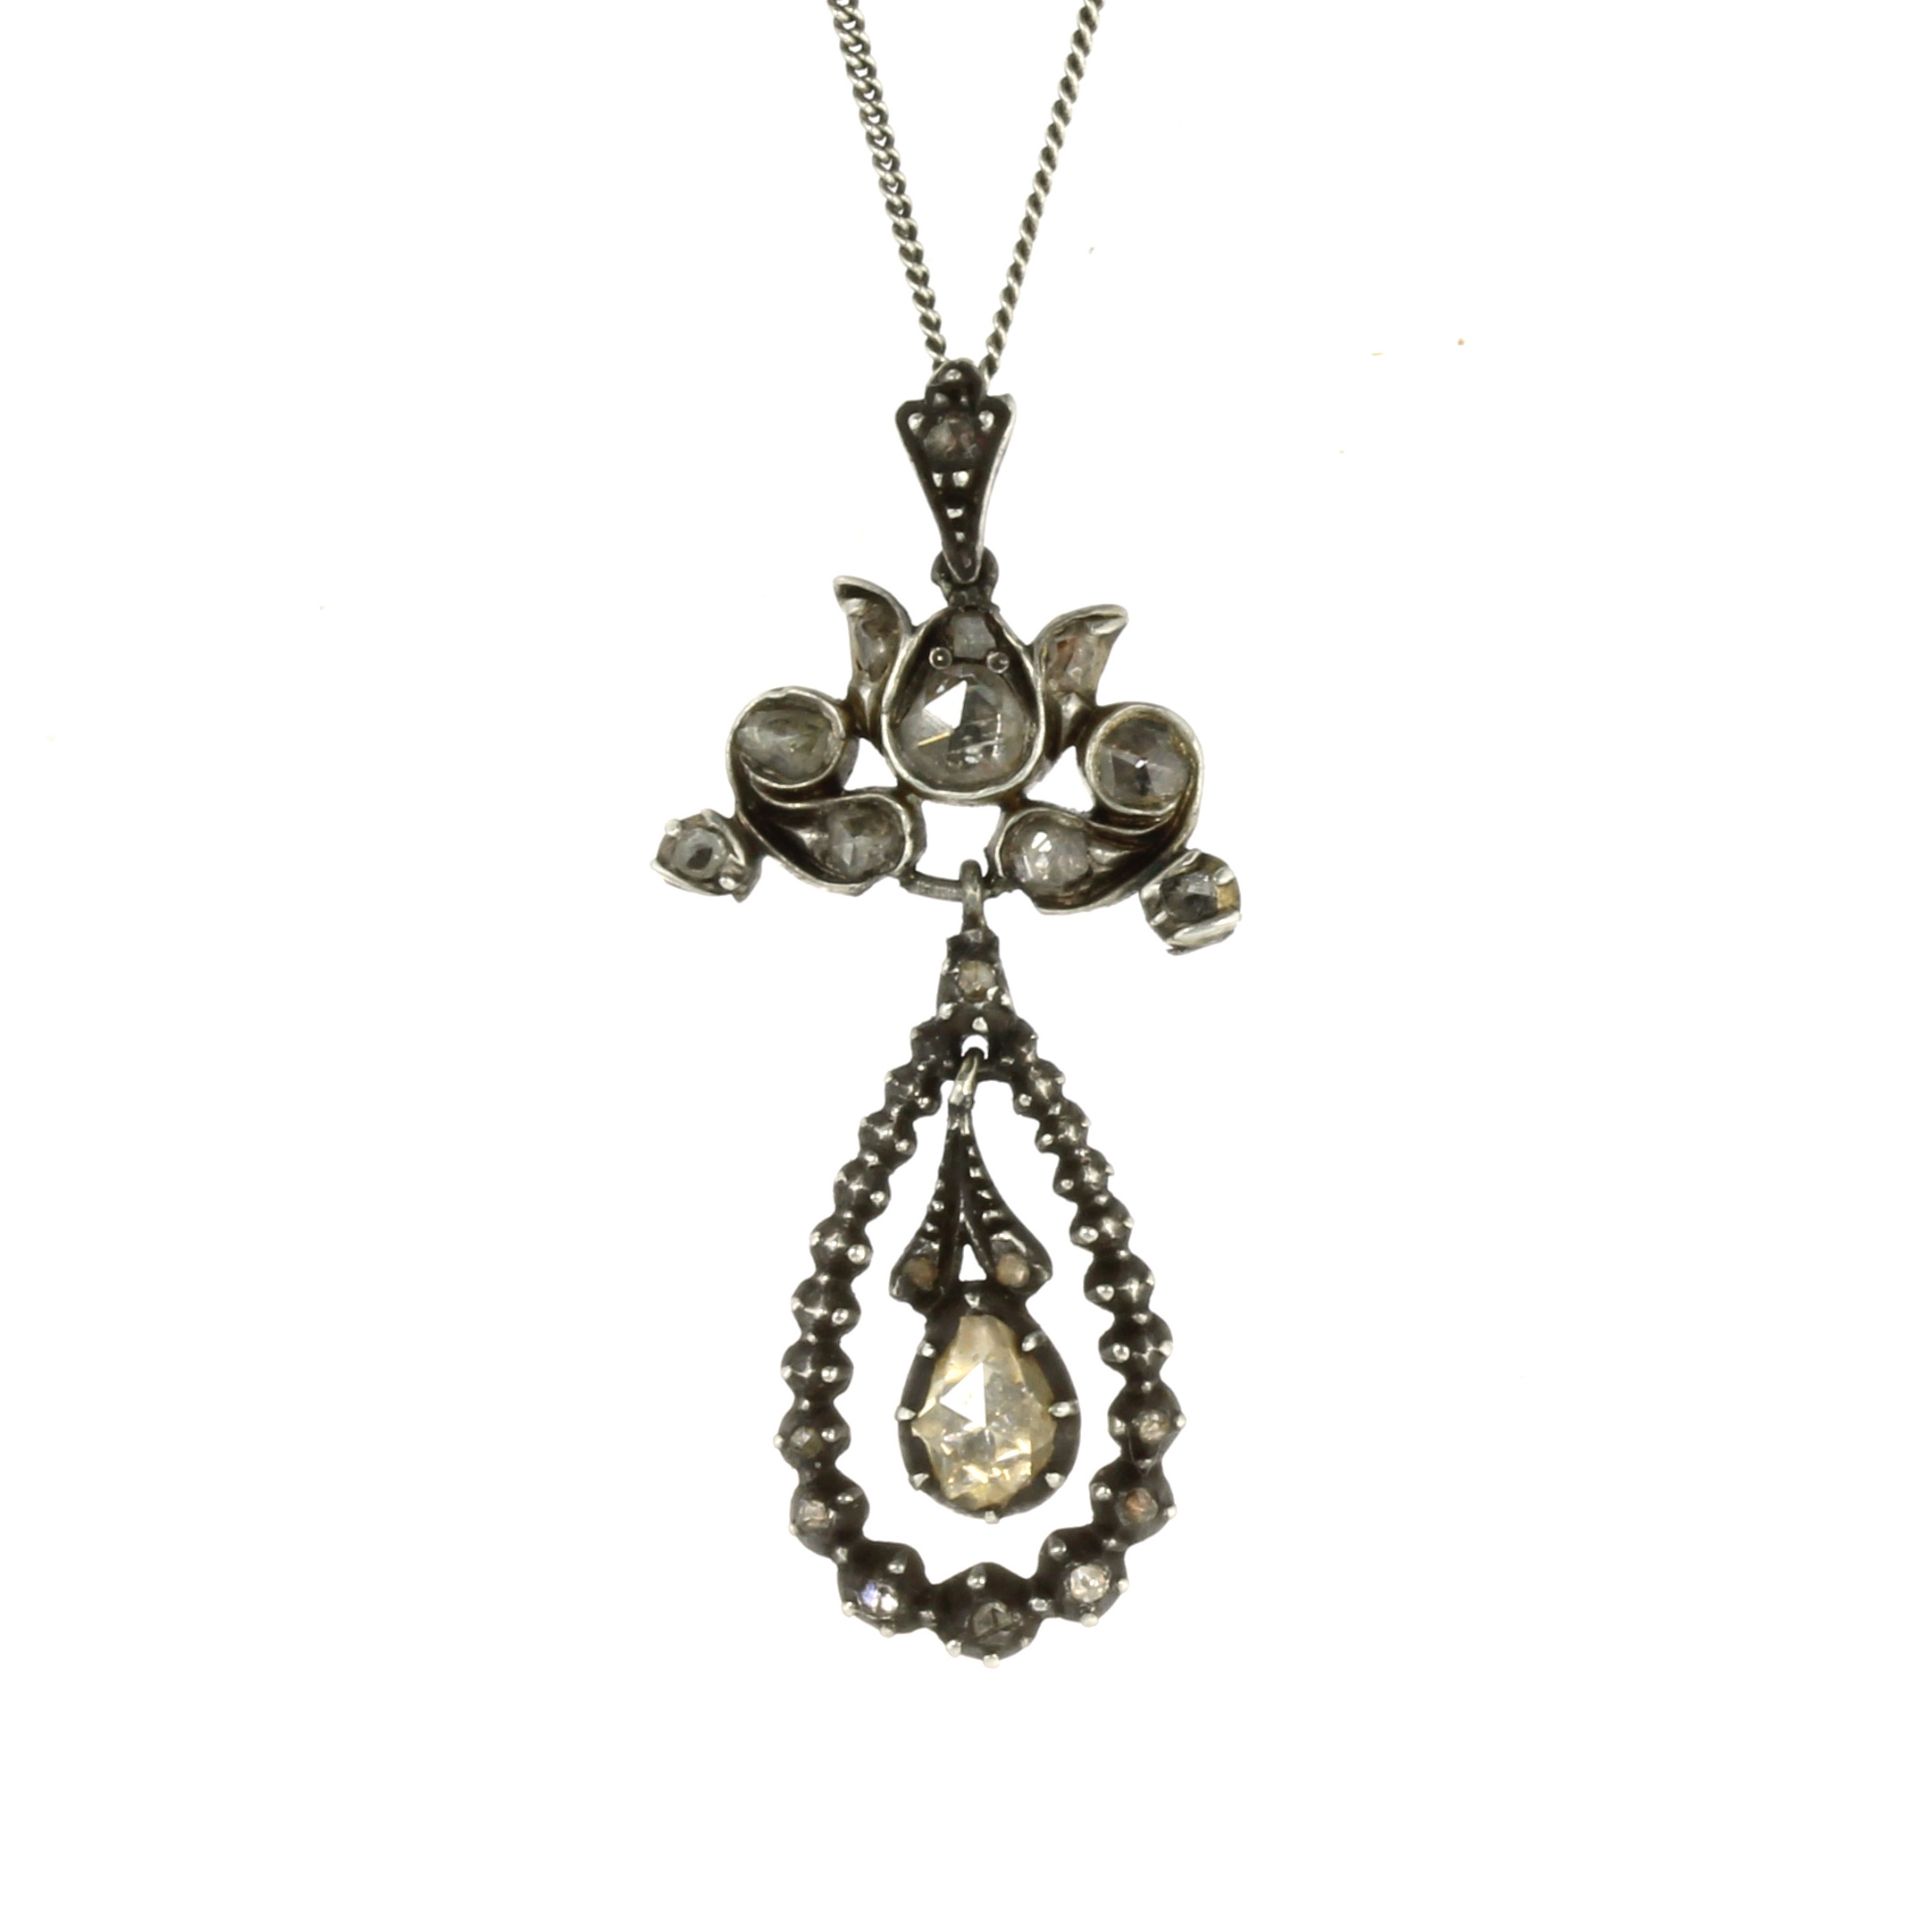 A DIAMOND DROP PENDANT AND CHAIN, LATE 19TH CENTURY DUTCH set with a central rose cut diamond